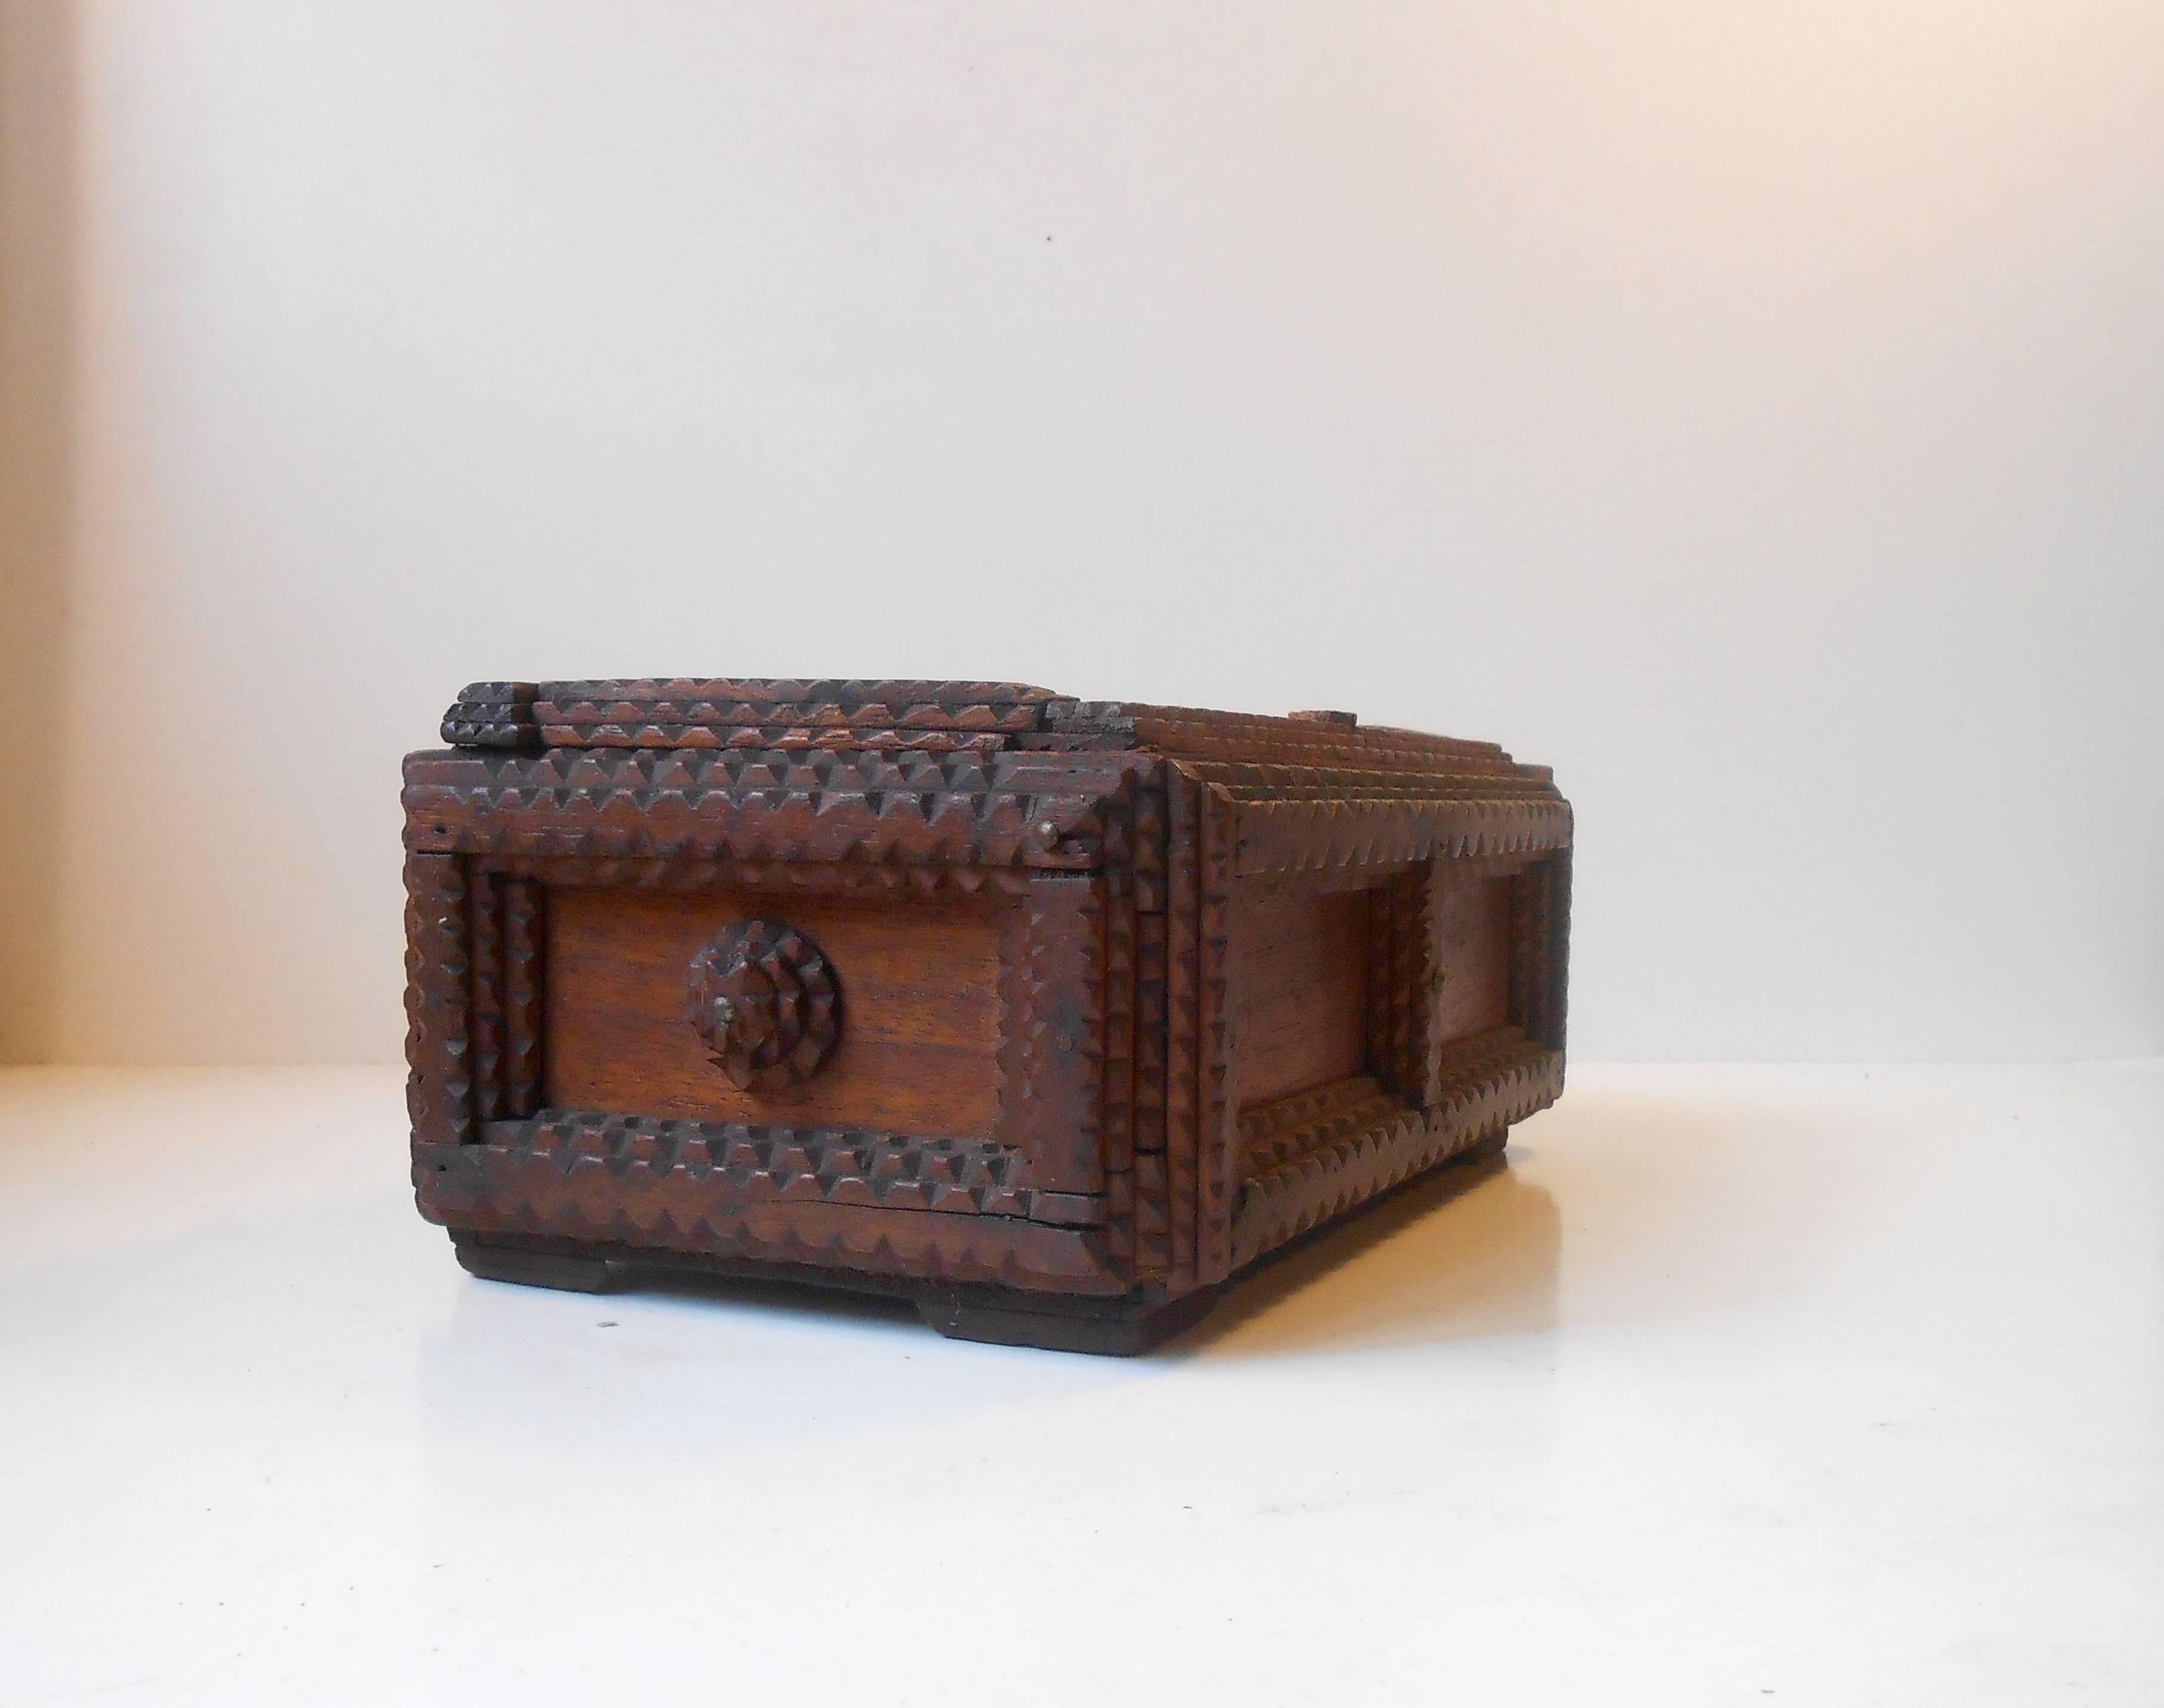 Large German tramp / volk art box. Hand-carved with characteristic Primitive detailing. Measurements: H 5 inches, W 10.25 inches, D 6.2 inches.